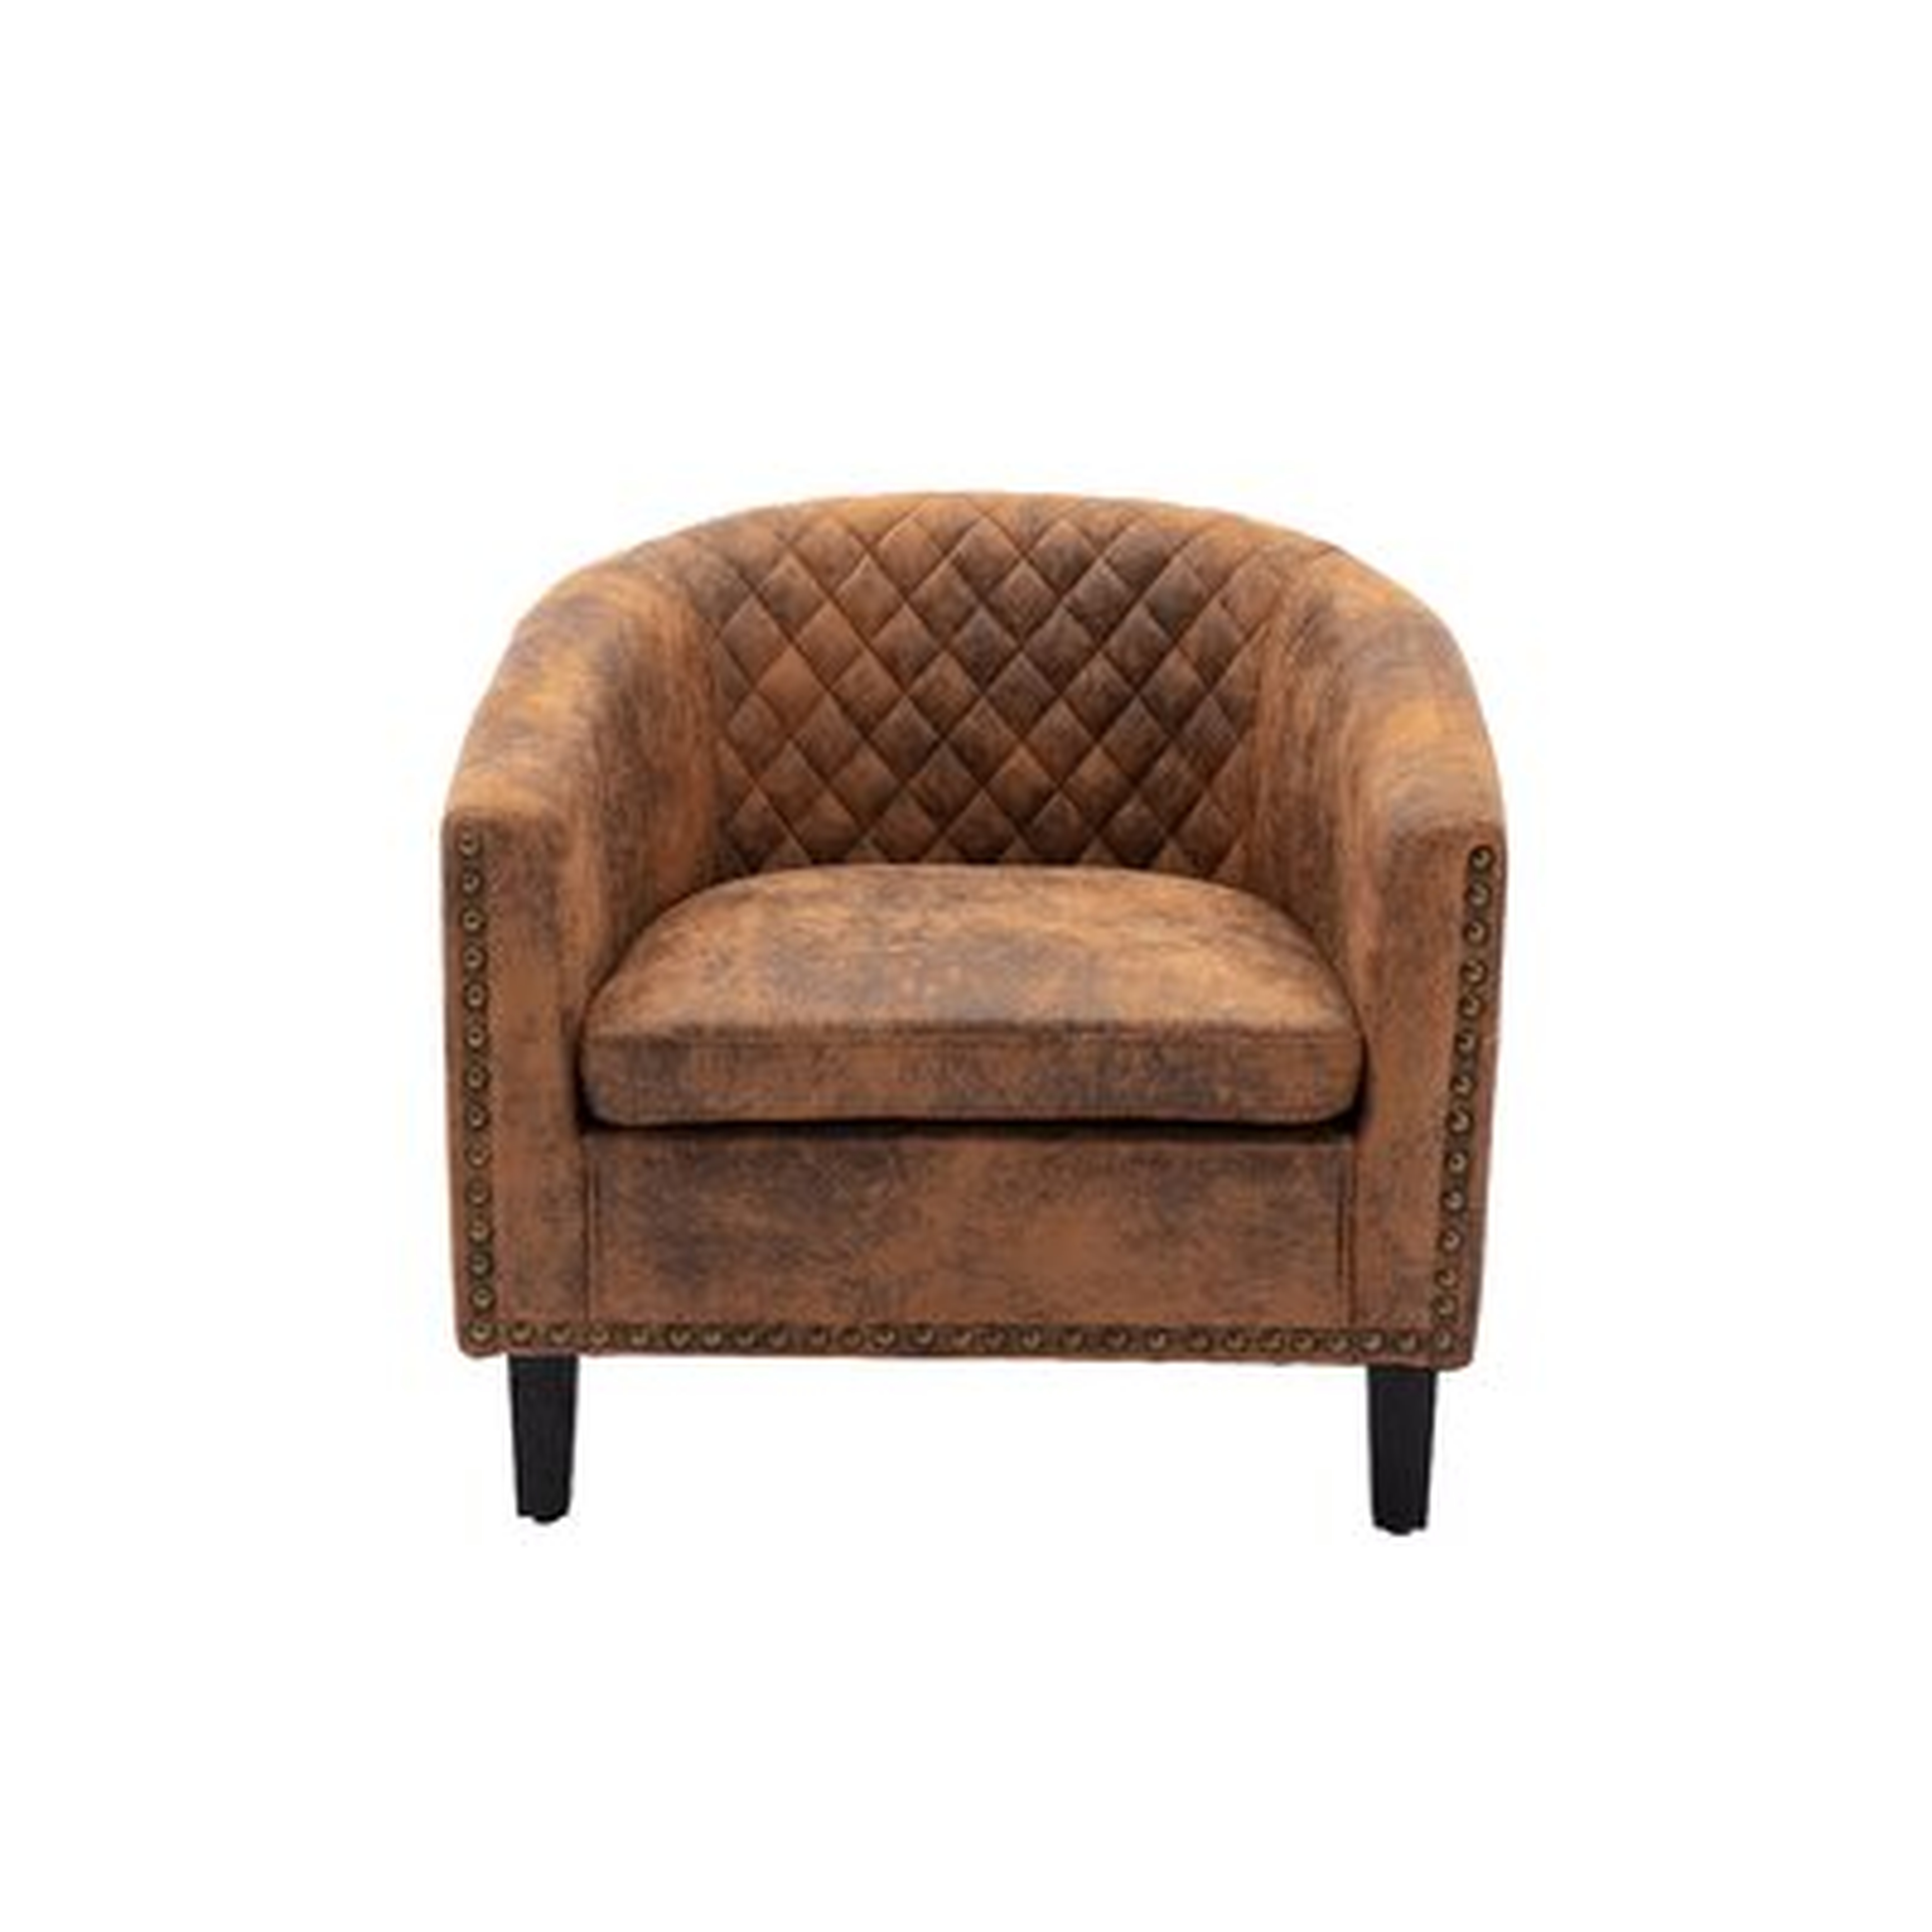 Accent Barrel Chair Living Room Chair With Nailheads And Solid Wood Legs - Wayfair